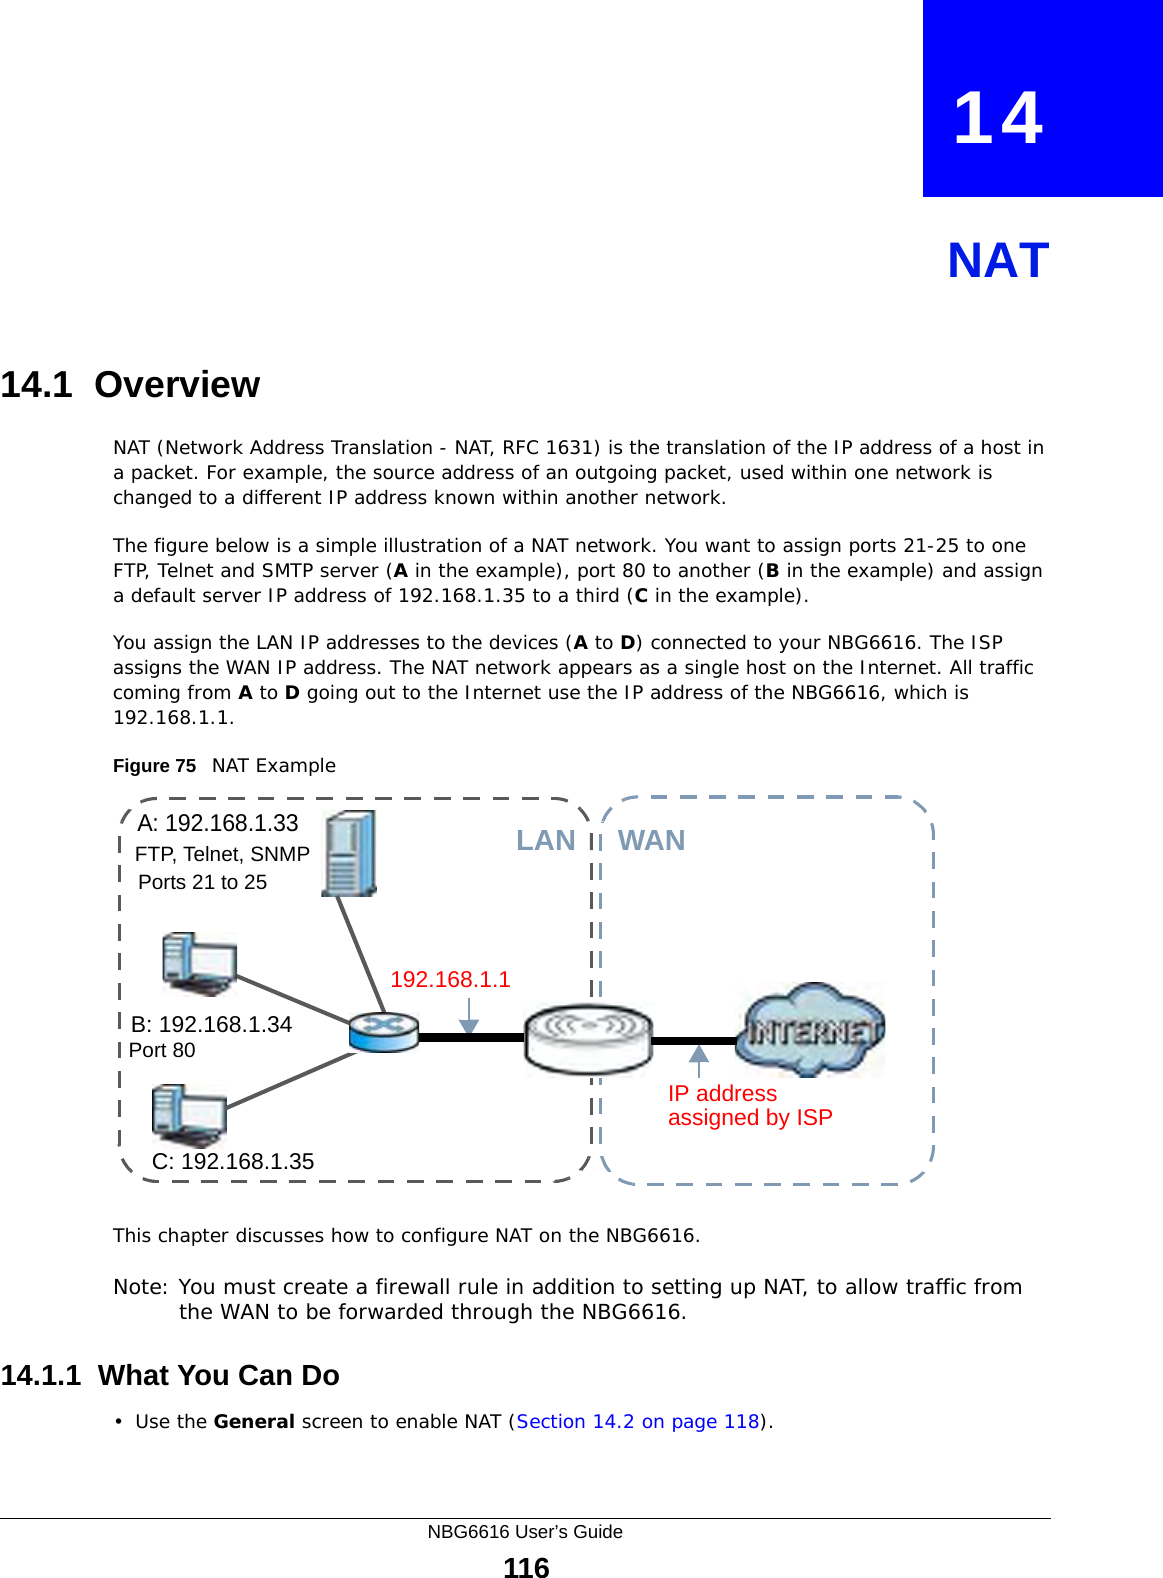 NBG6616 User’s Guide116CHAPTER   14NAT14.1  Overview   NAT (Network Address Translation - NAT, RFC 1631) is the translation of the IP address of a host in a packet. For example, the source address of an outgoing packet, used within one network is changed to a different IP address known within another network.The figure below is a simple illustration of a NAT network. You want to assign ports 21-25 to one FTP, Telnet and SMTP server (A in the example), port 80 to another (B in the example) and assign a default server IP address of 192.168.1.35 to a third (C in the example). You assign the LAN IP addresses to the devices (A to D) connected to your NBG6616. The ISP assigns the WAN IP address. The NAT network appears as a single host on the Internet. All traffic coming from A to D going out to the Internet use the IP address of the NBG6616, which is 192.168.1.1.Figure 75   NAT ExampleThis chapter discusses how to configure NAT on the NBG6616.Note: You must create a firewall rule in addition to setting up NAT, to allow traffic from the WAN to be forwarded through the NBG6616.14.1.1  What You Can Do•Use the General screen to enable NAT (Section 14.2 on page 118).A: 192.168.1.33B: 192.168.1.34C: 192.168.1.35IP address 192.168.1.1WANLANassigned by ISPFTP, Telnet, SNMPPort 80Ports 21 to 25